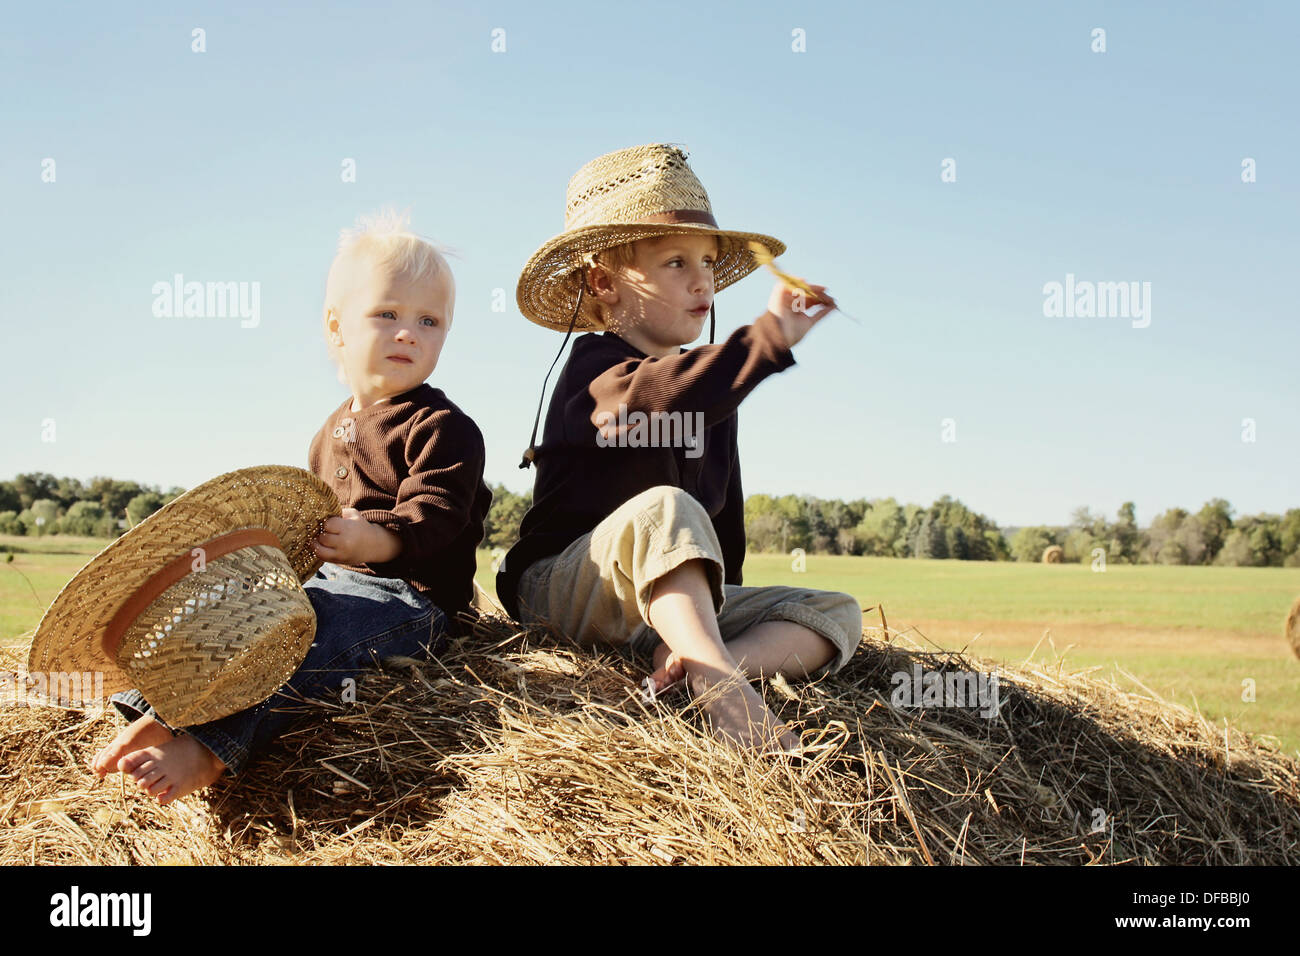 Two happy little boys, a 4 year old and baby brother, are sitting on top of a large hay bale, wearing straw hats on autumn day Stock Photo